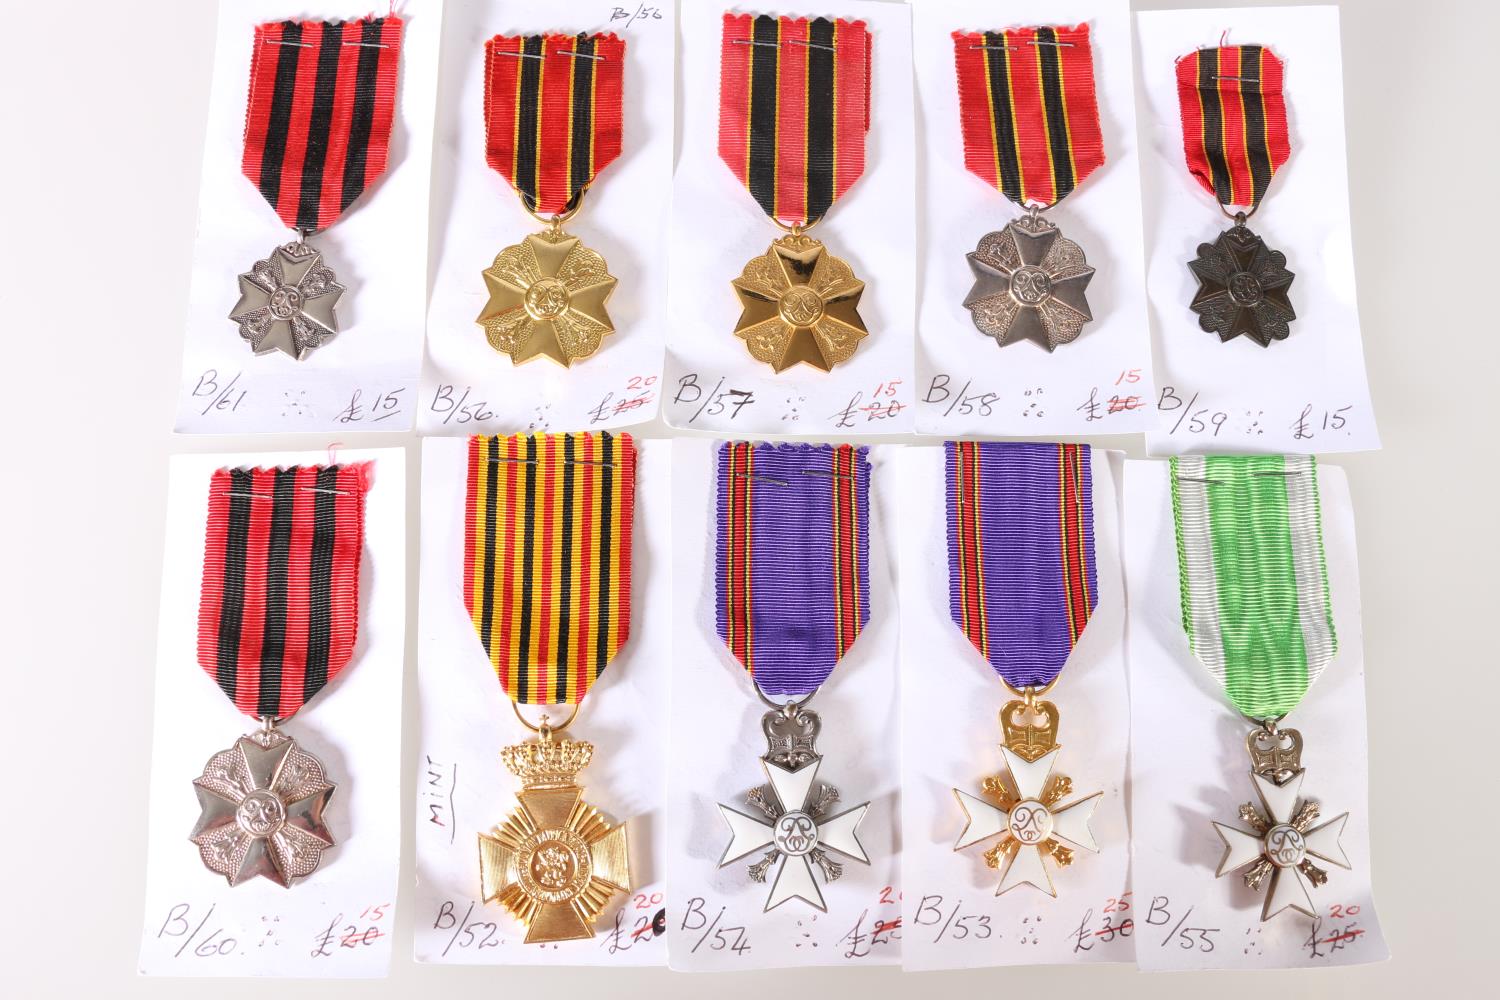 BELGIUM. Belgian medals including Military decoration for long service 2nd Class, Civil decoration